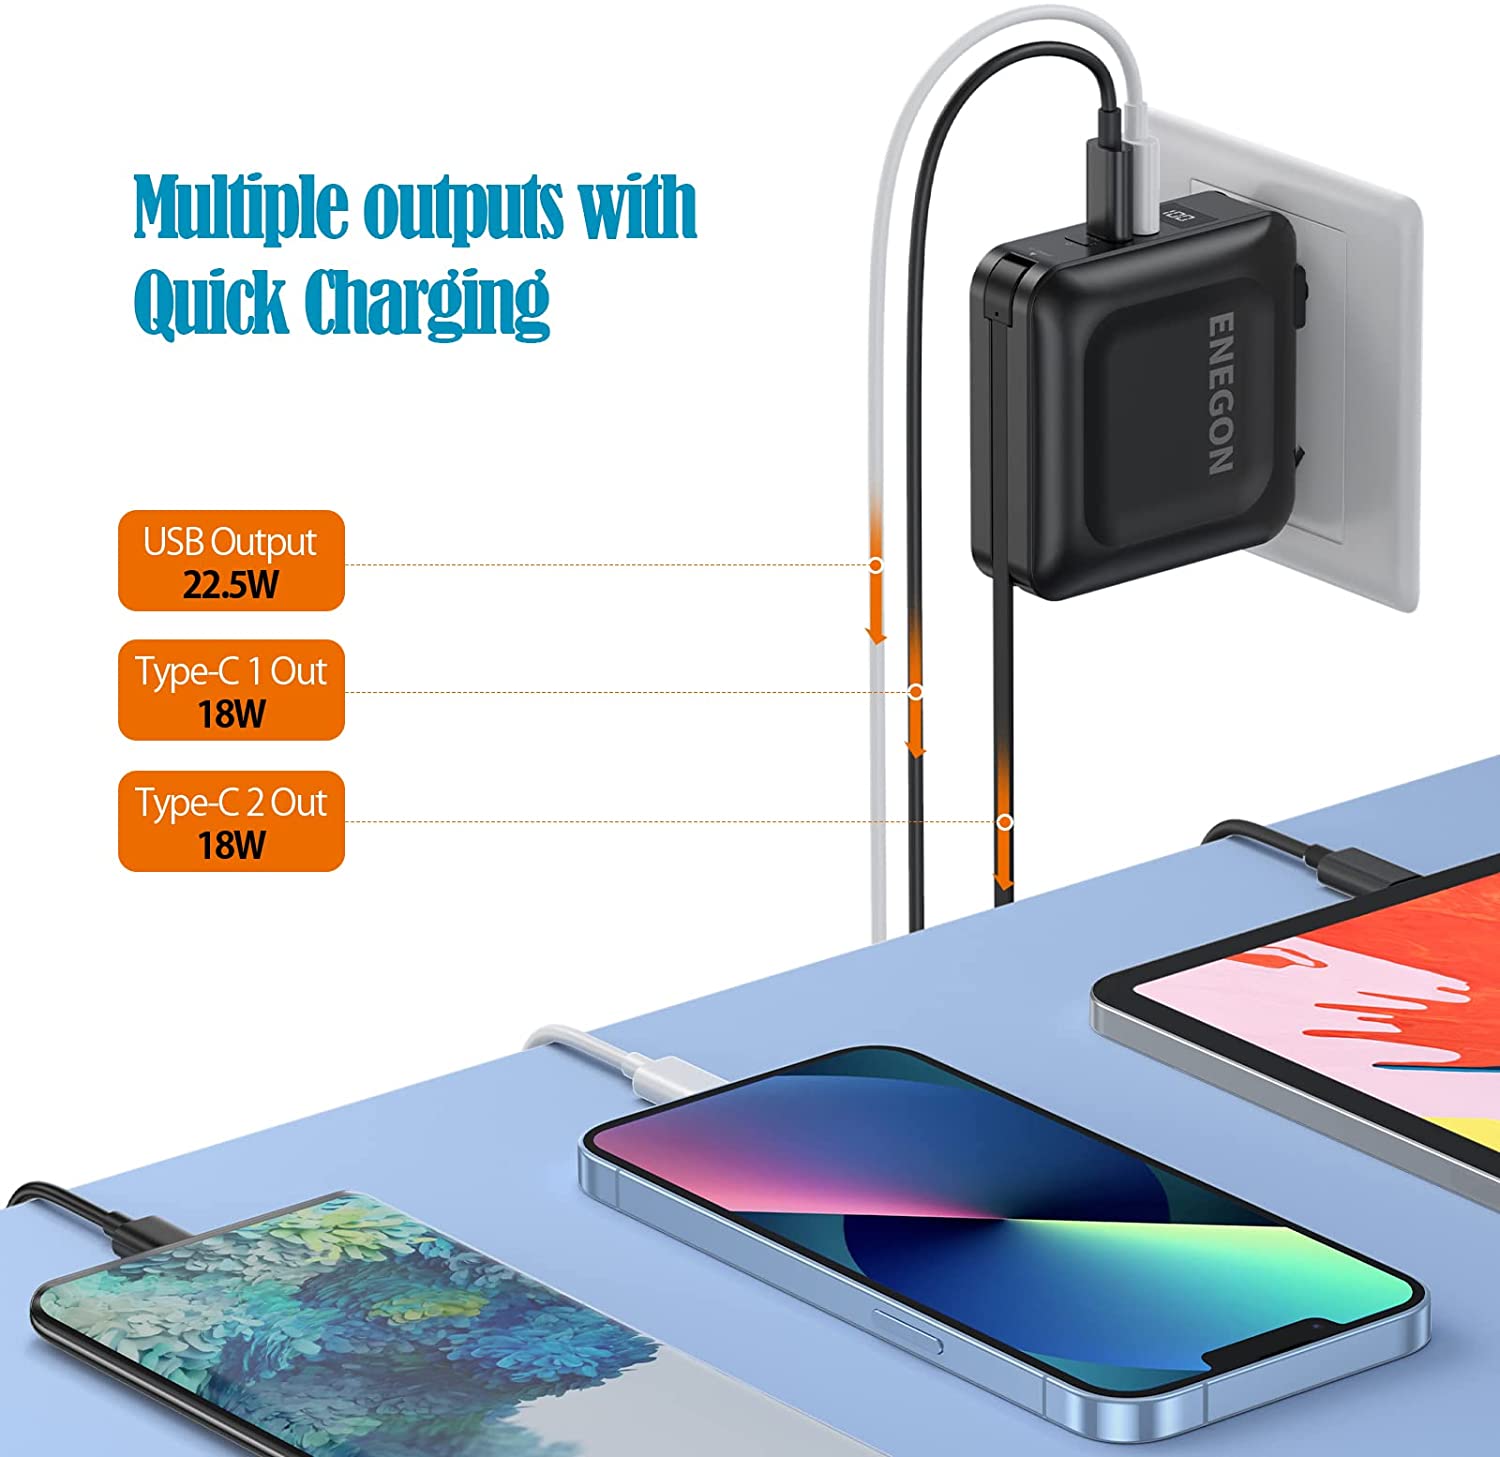 Power bank with AC outlet 3 in 1 -15000mAH - ENEGON